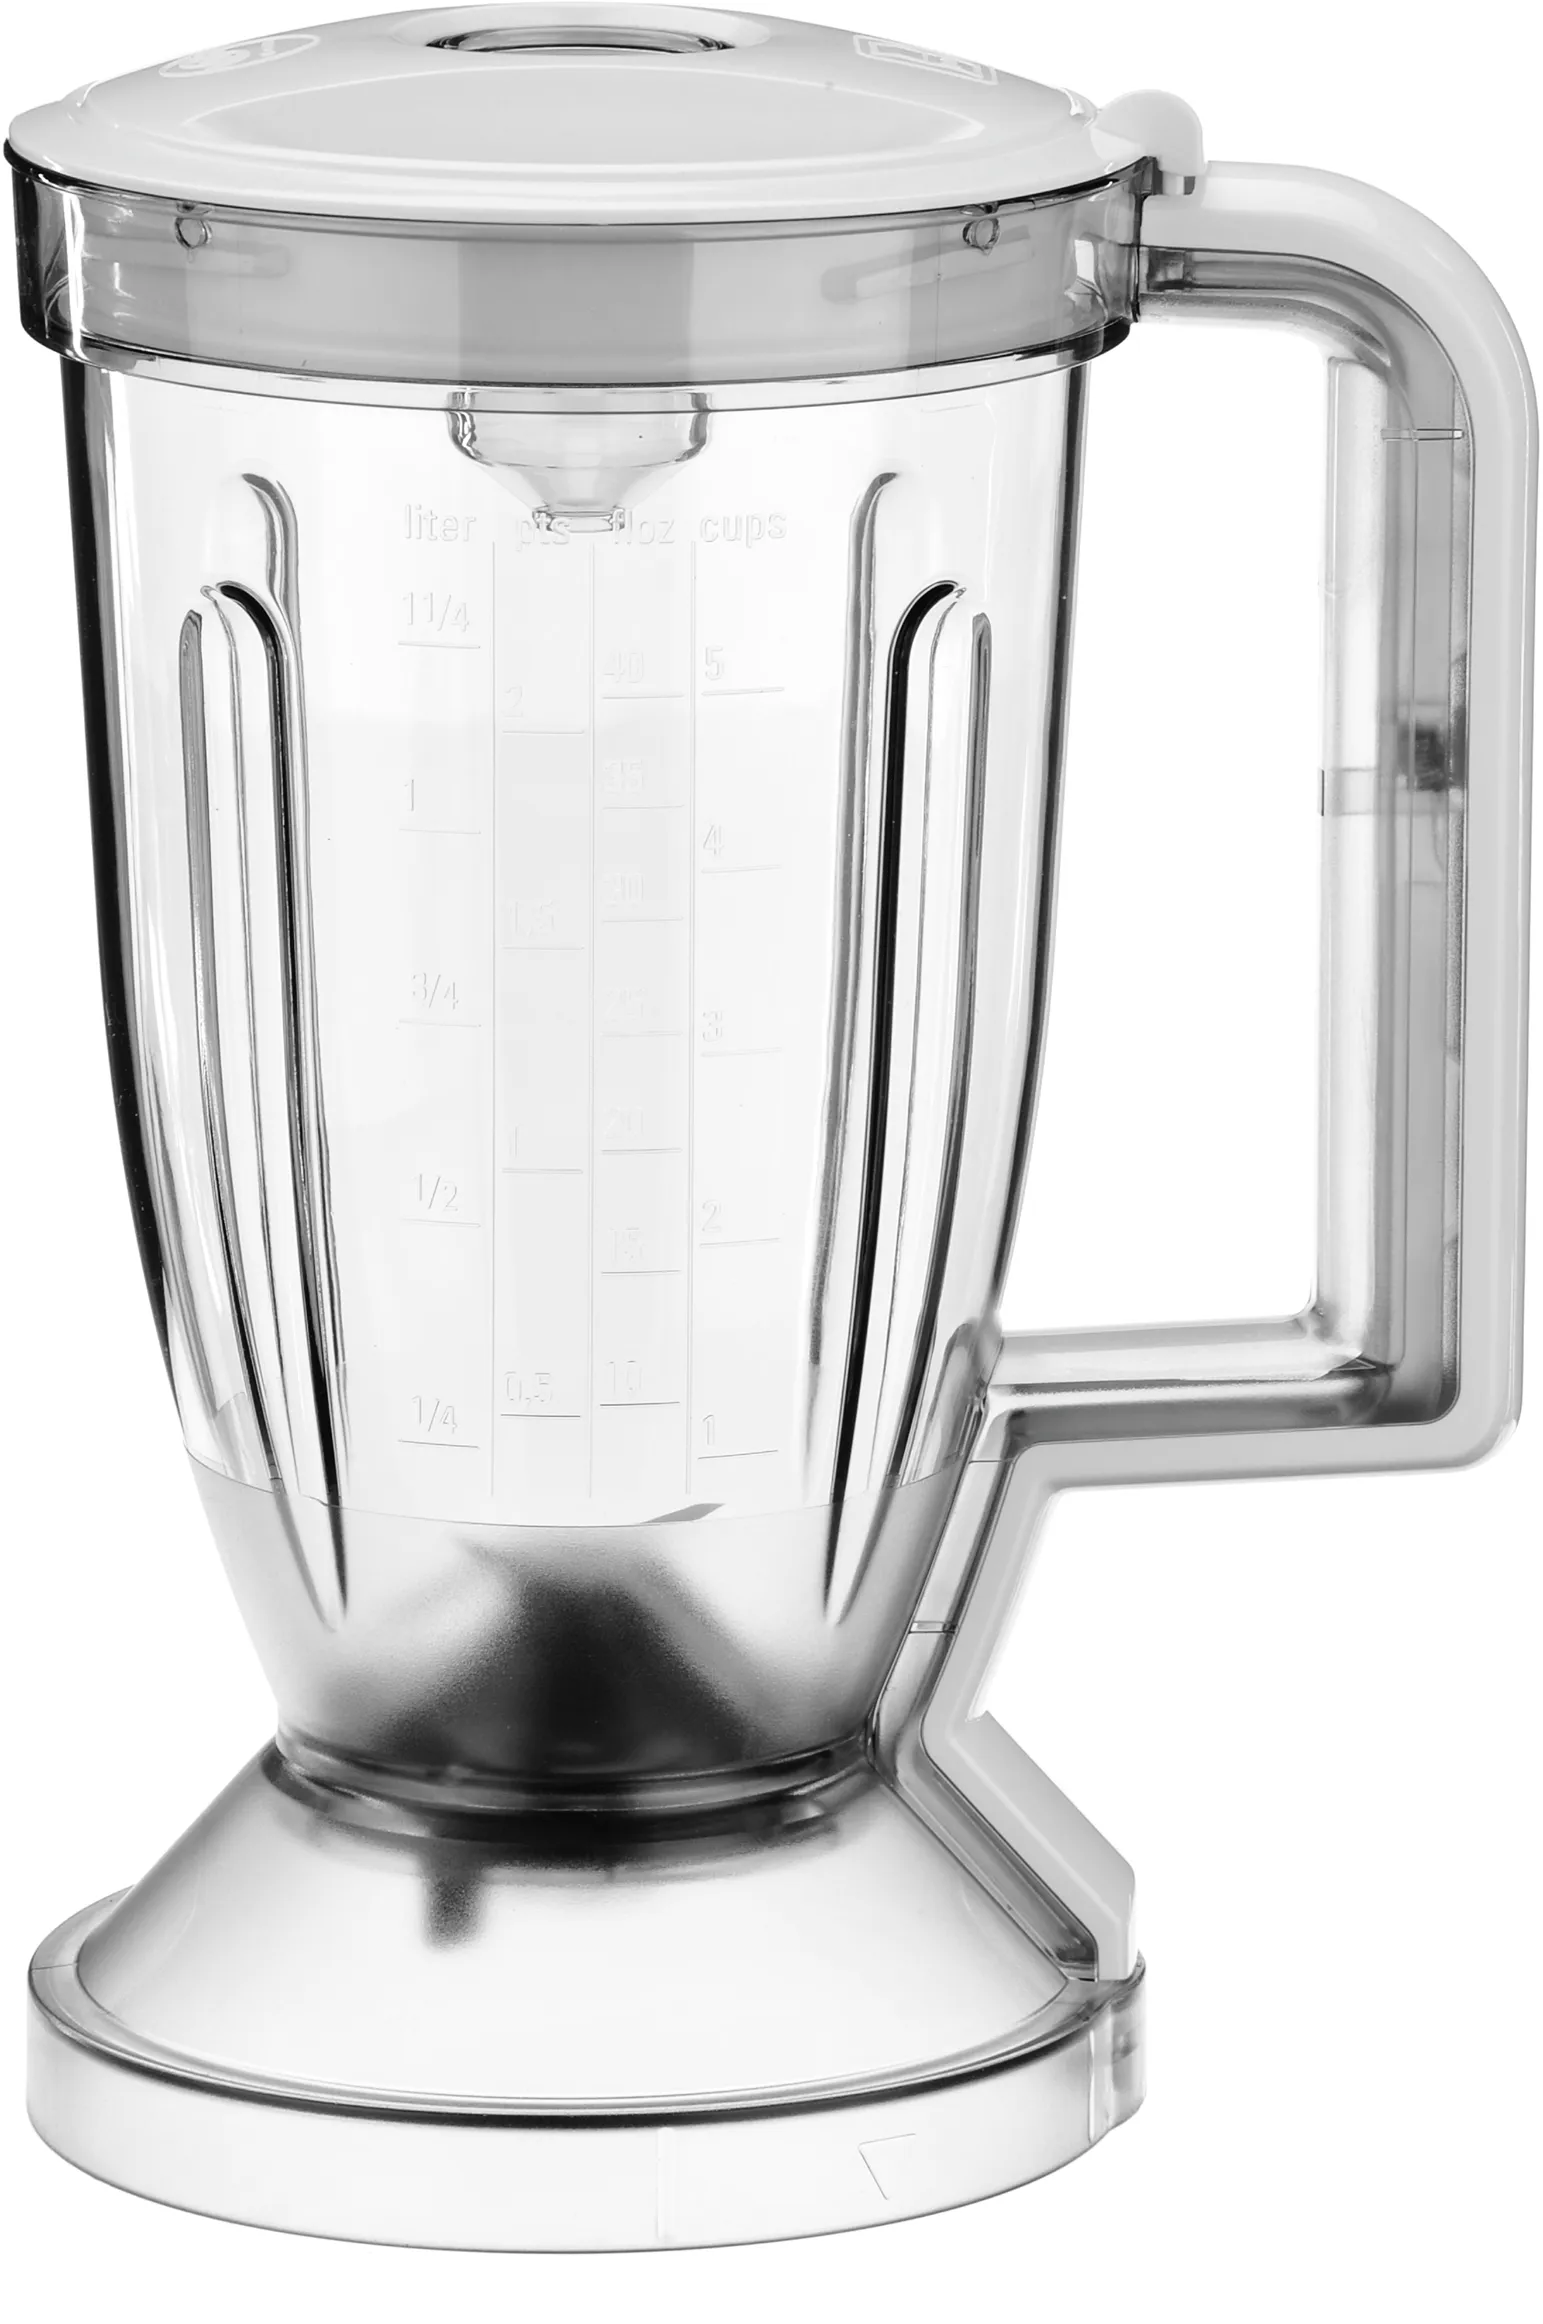 Blender attachment For food processors 